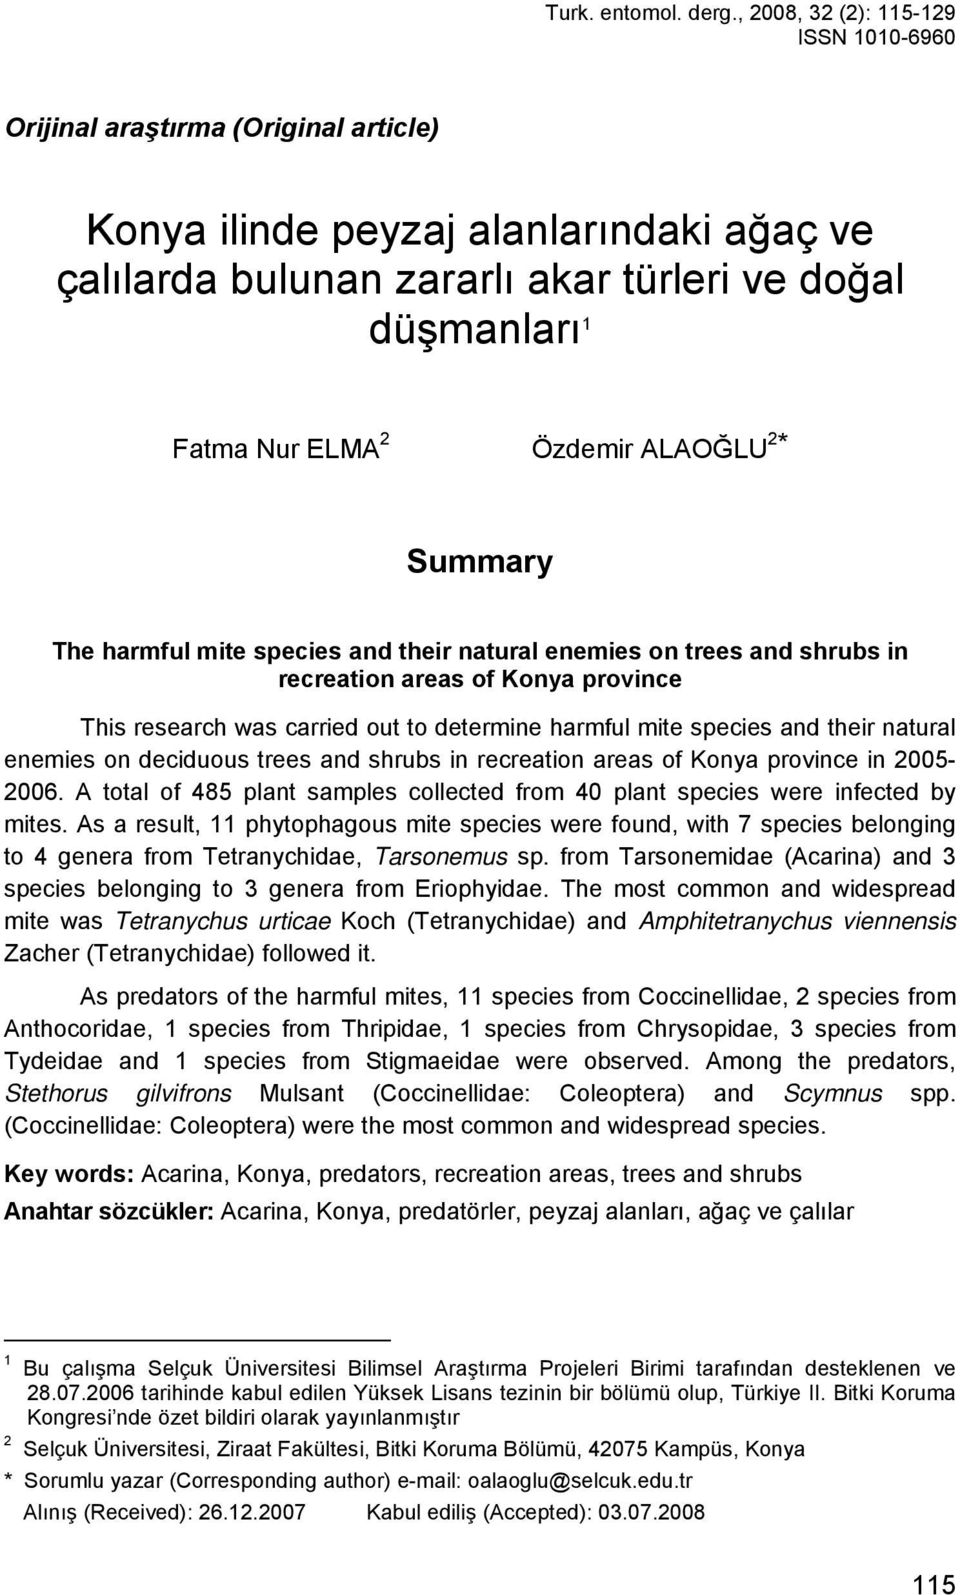 Özdemir ALAOĞLU 2 * Summary The harmful mite species and their natural enemies on trees and shrubs in recreation areas of Konya province This research was carried out to determine harmful mite